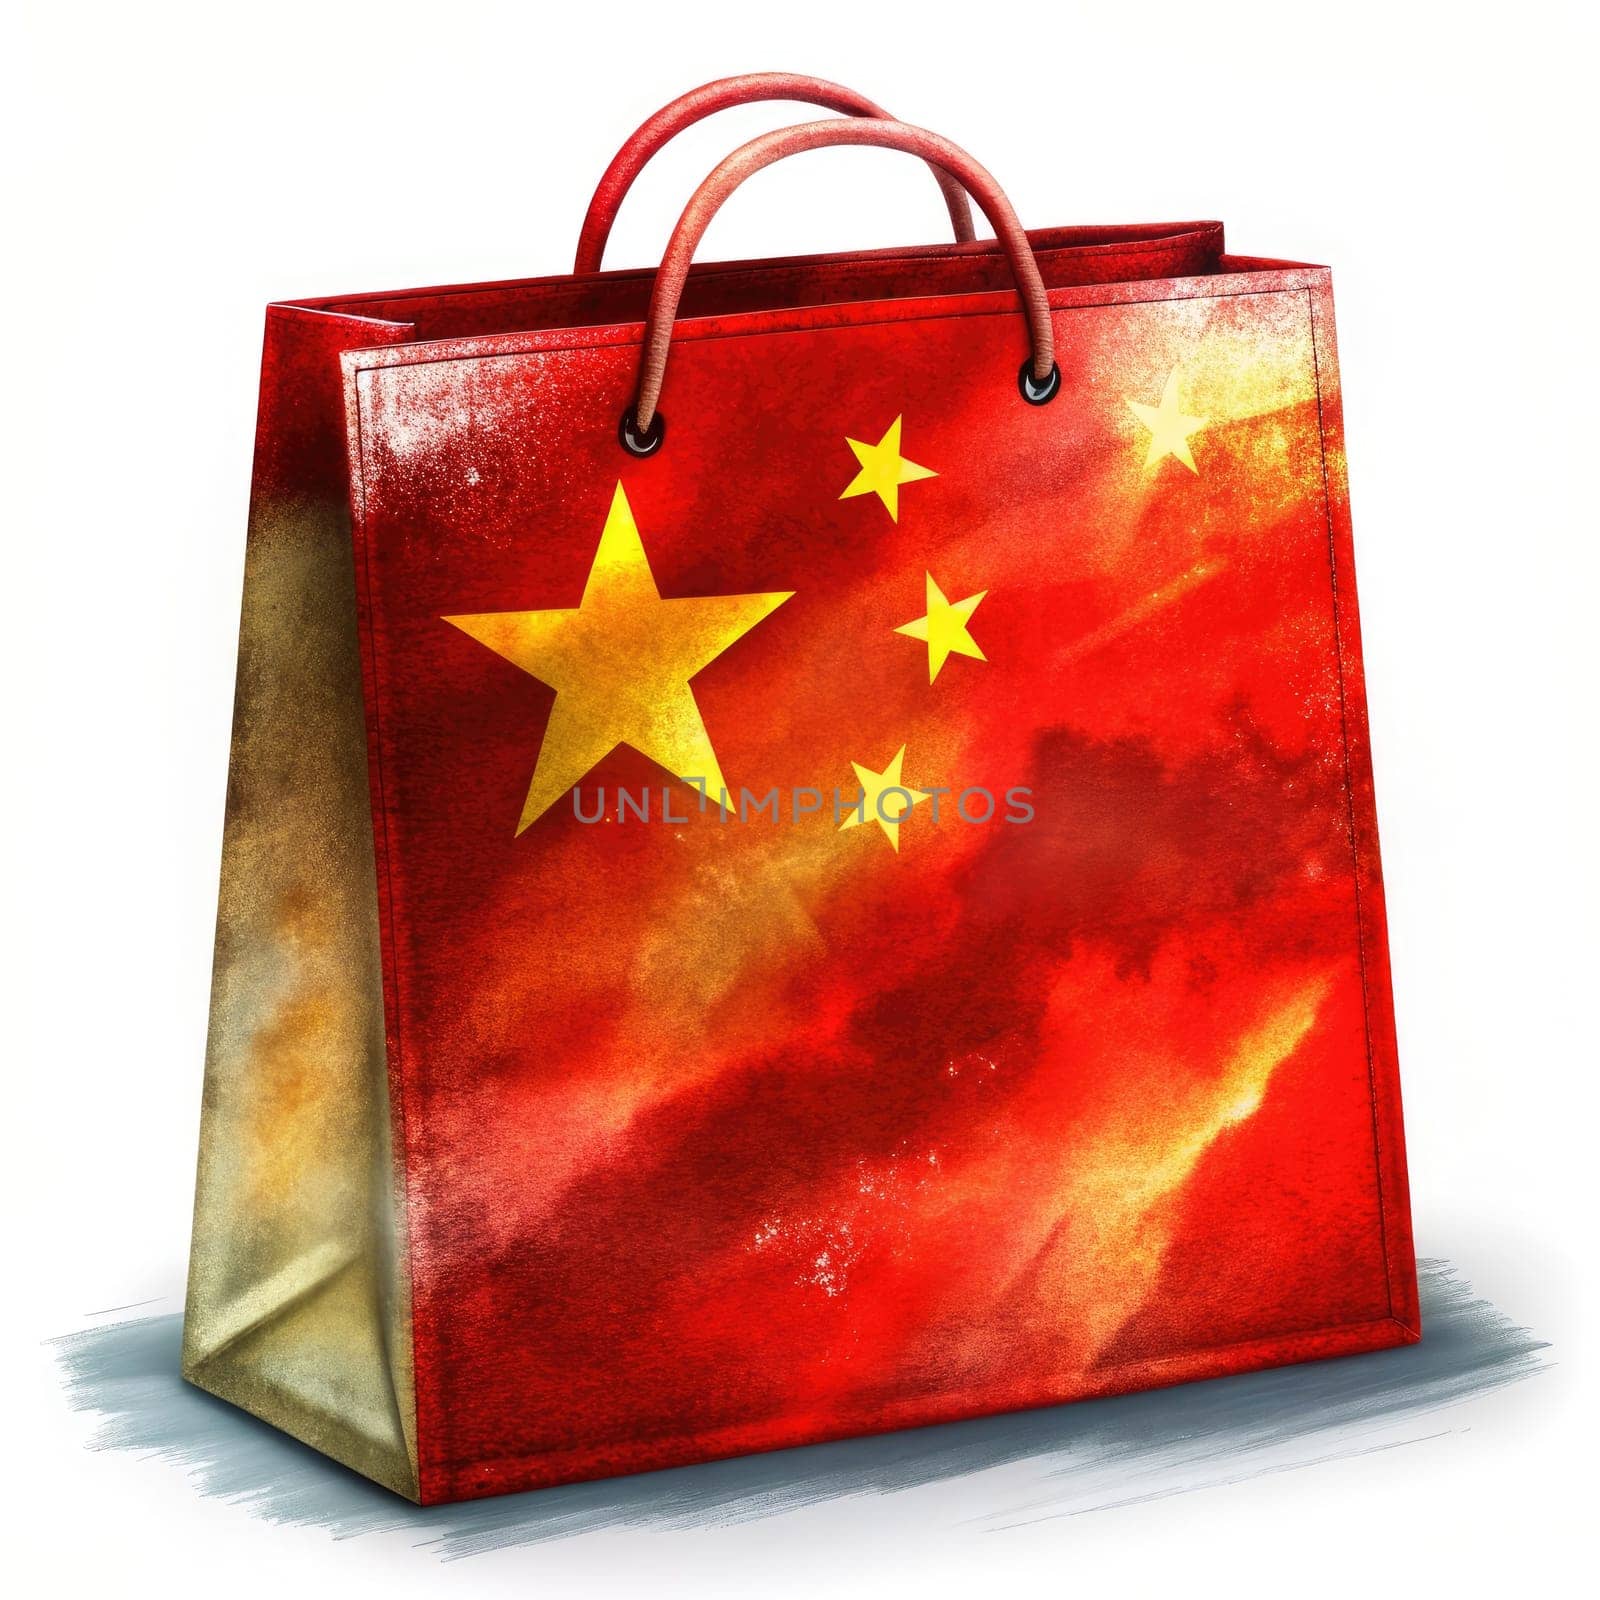 CHINA Flag Shopping Bag: Iconic Symbol of Chinese Pride on White Background. Premium Quality: Durable CHINA Flag Shopping Bag for Stylish Travelers. Chinese Heritage: Flag-Inspired Shopping Tote Bag for Trendy Outings Chic Retail Therapy: Stylish CHINA Flag Carryall for Urban Fashionistas